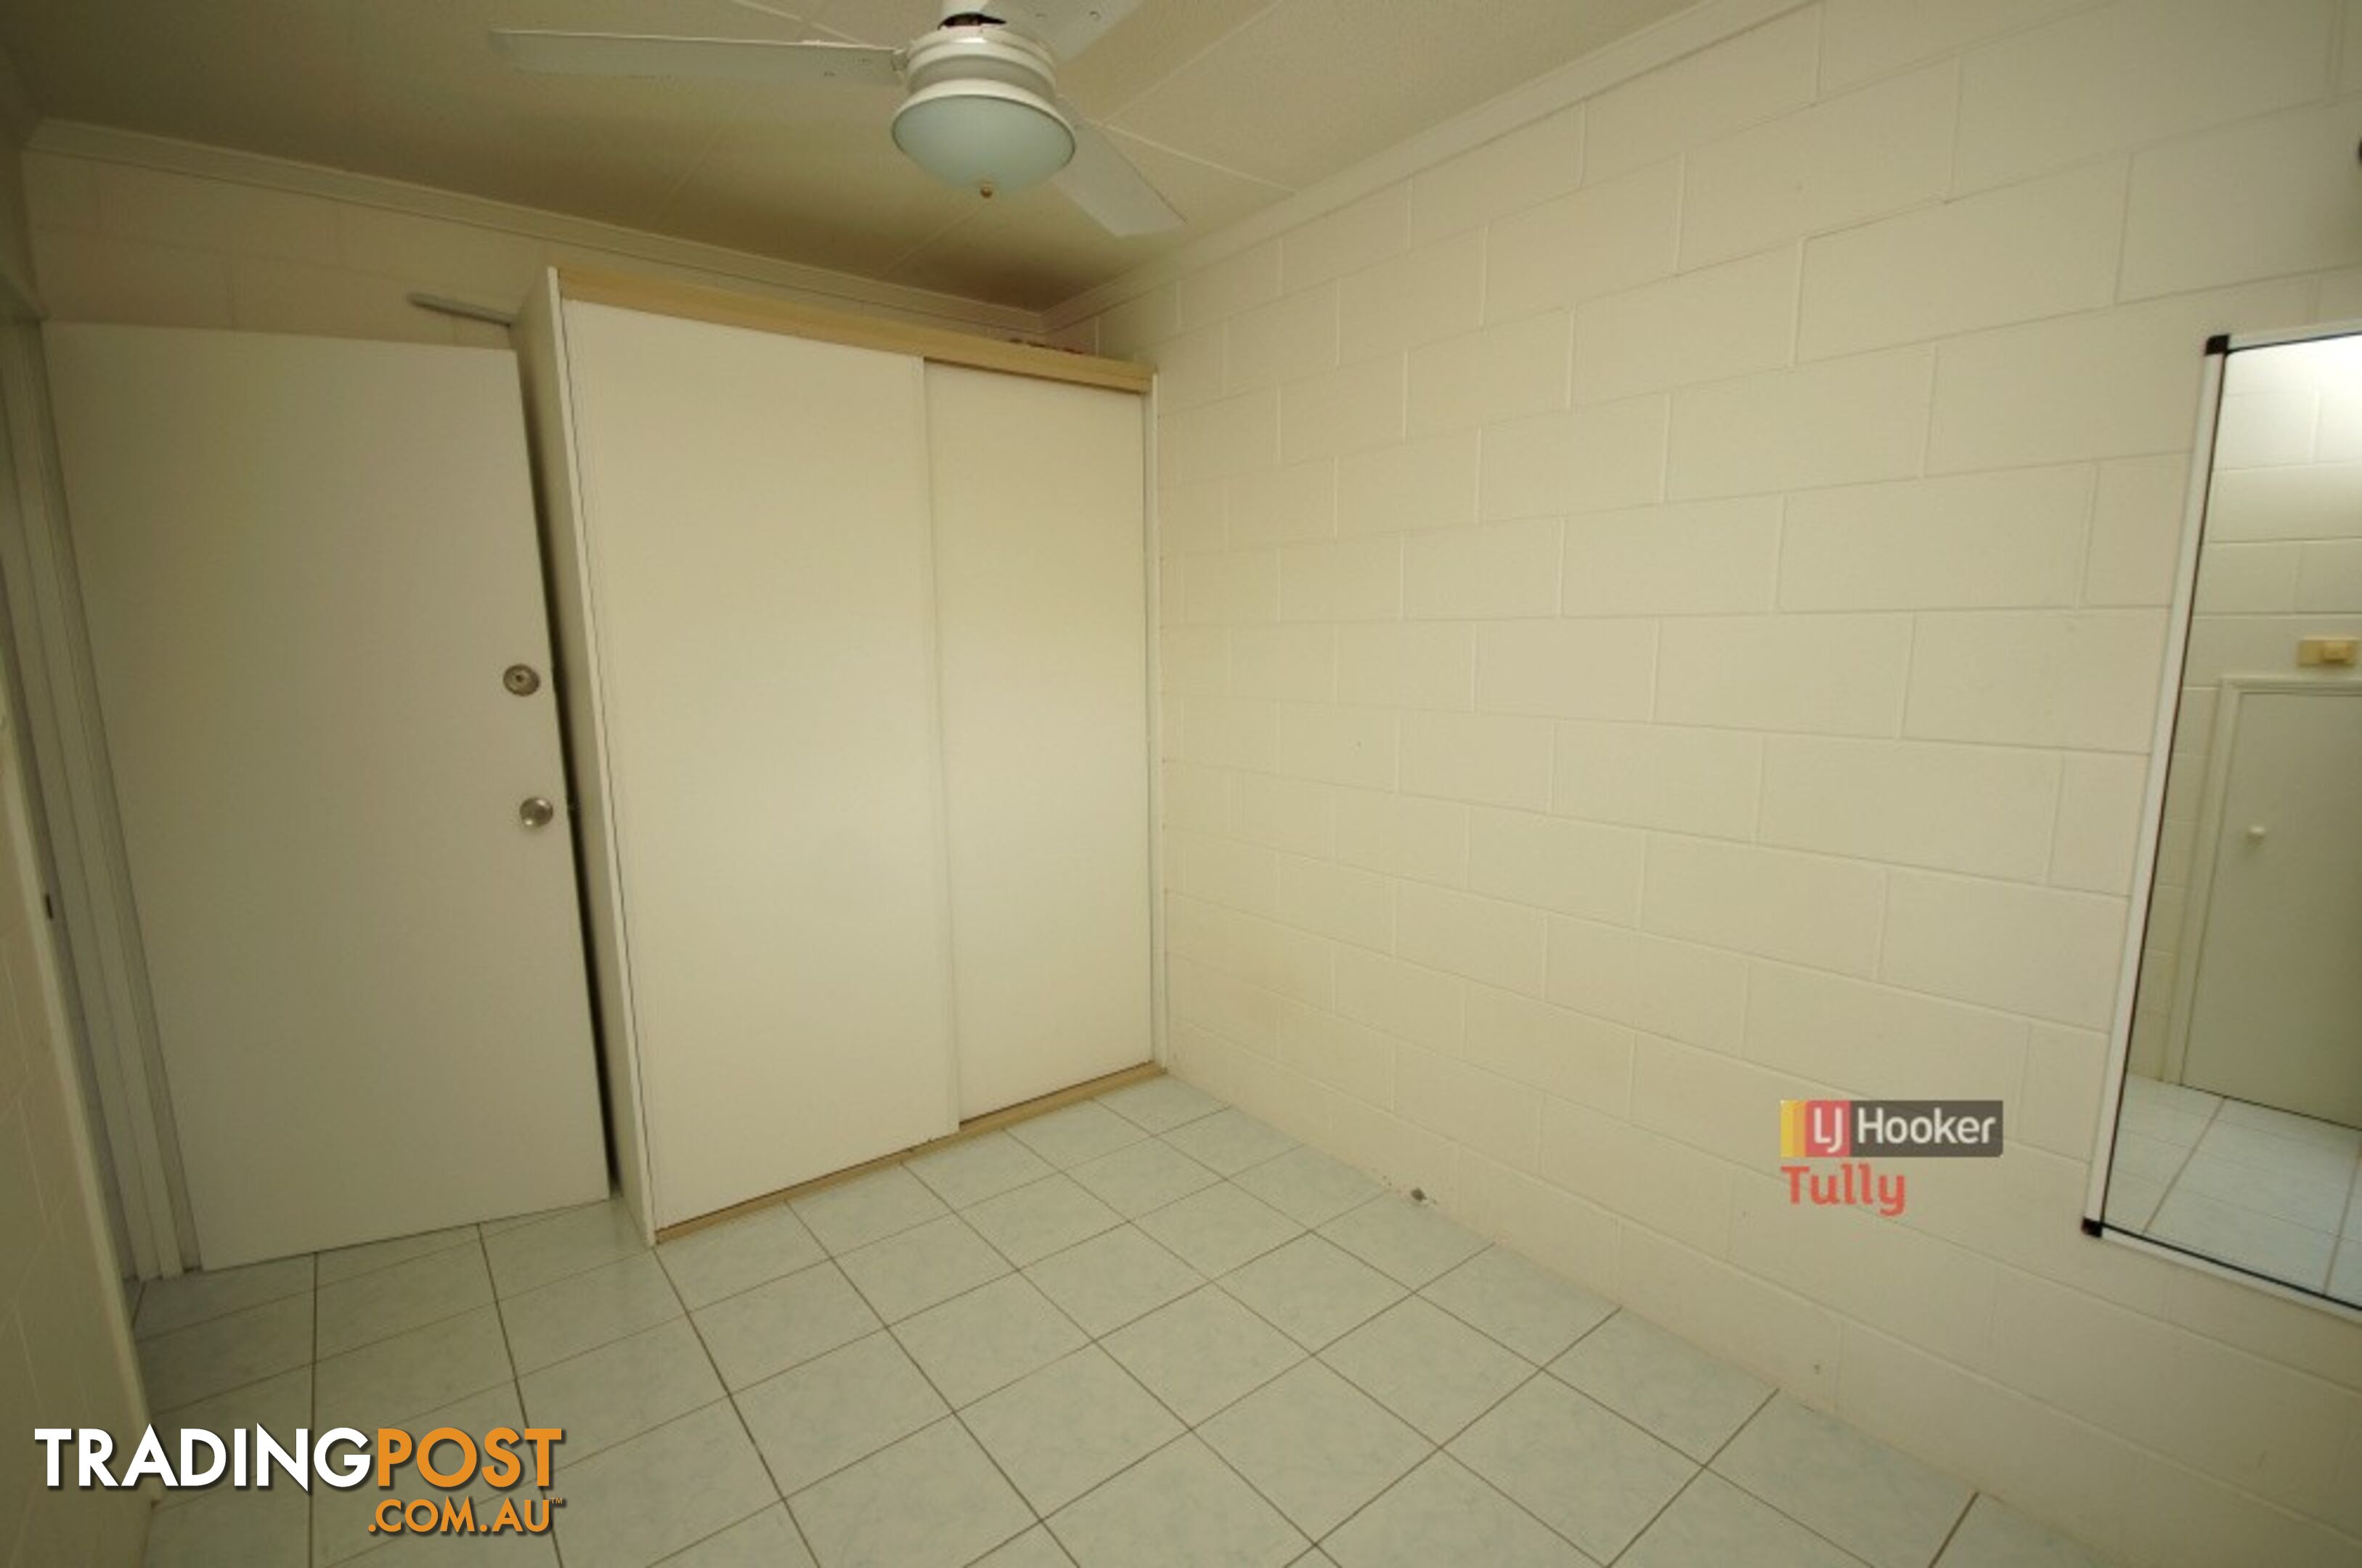 1/5 KIRK TULLY QLD 4854